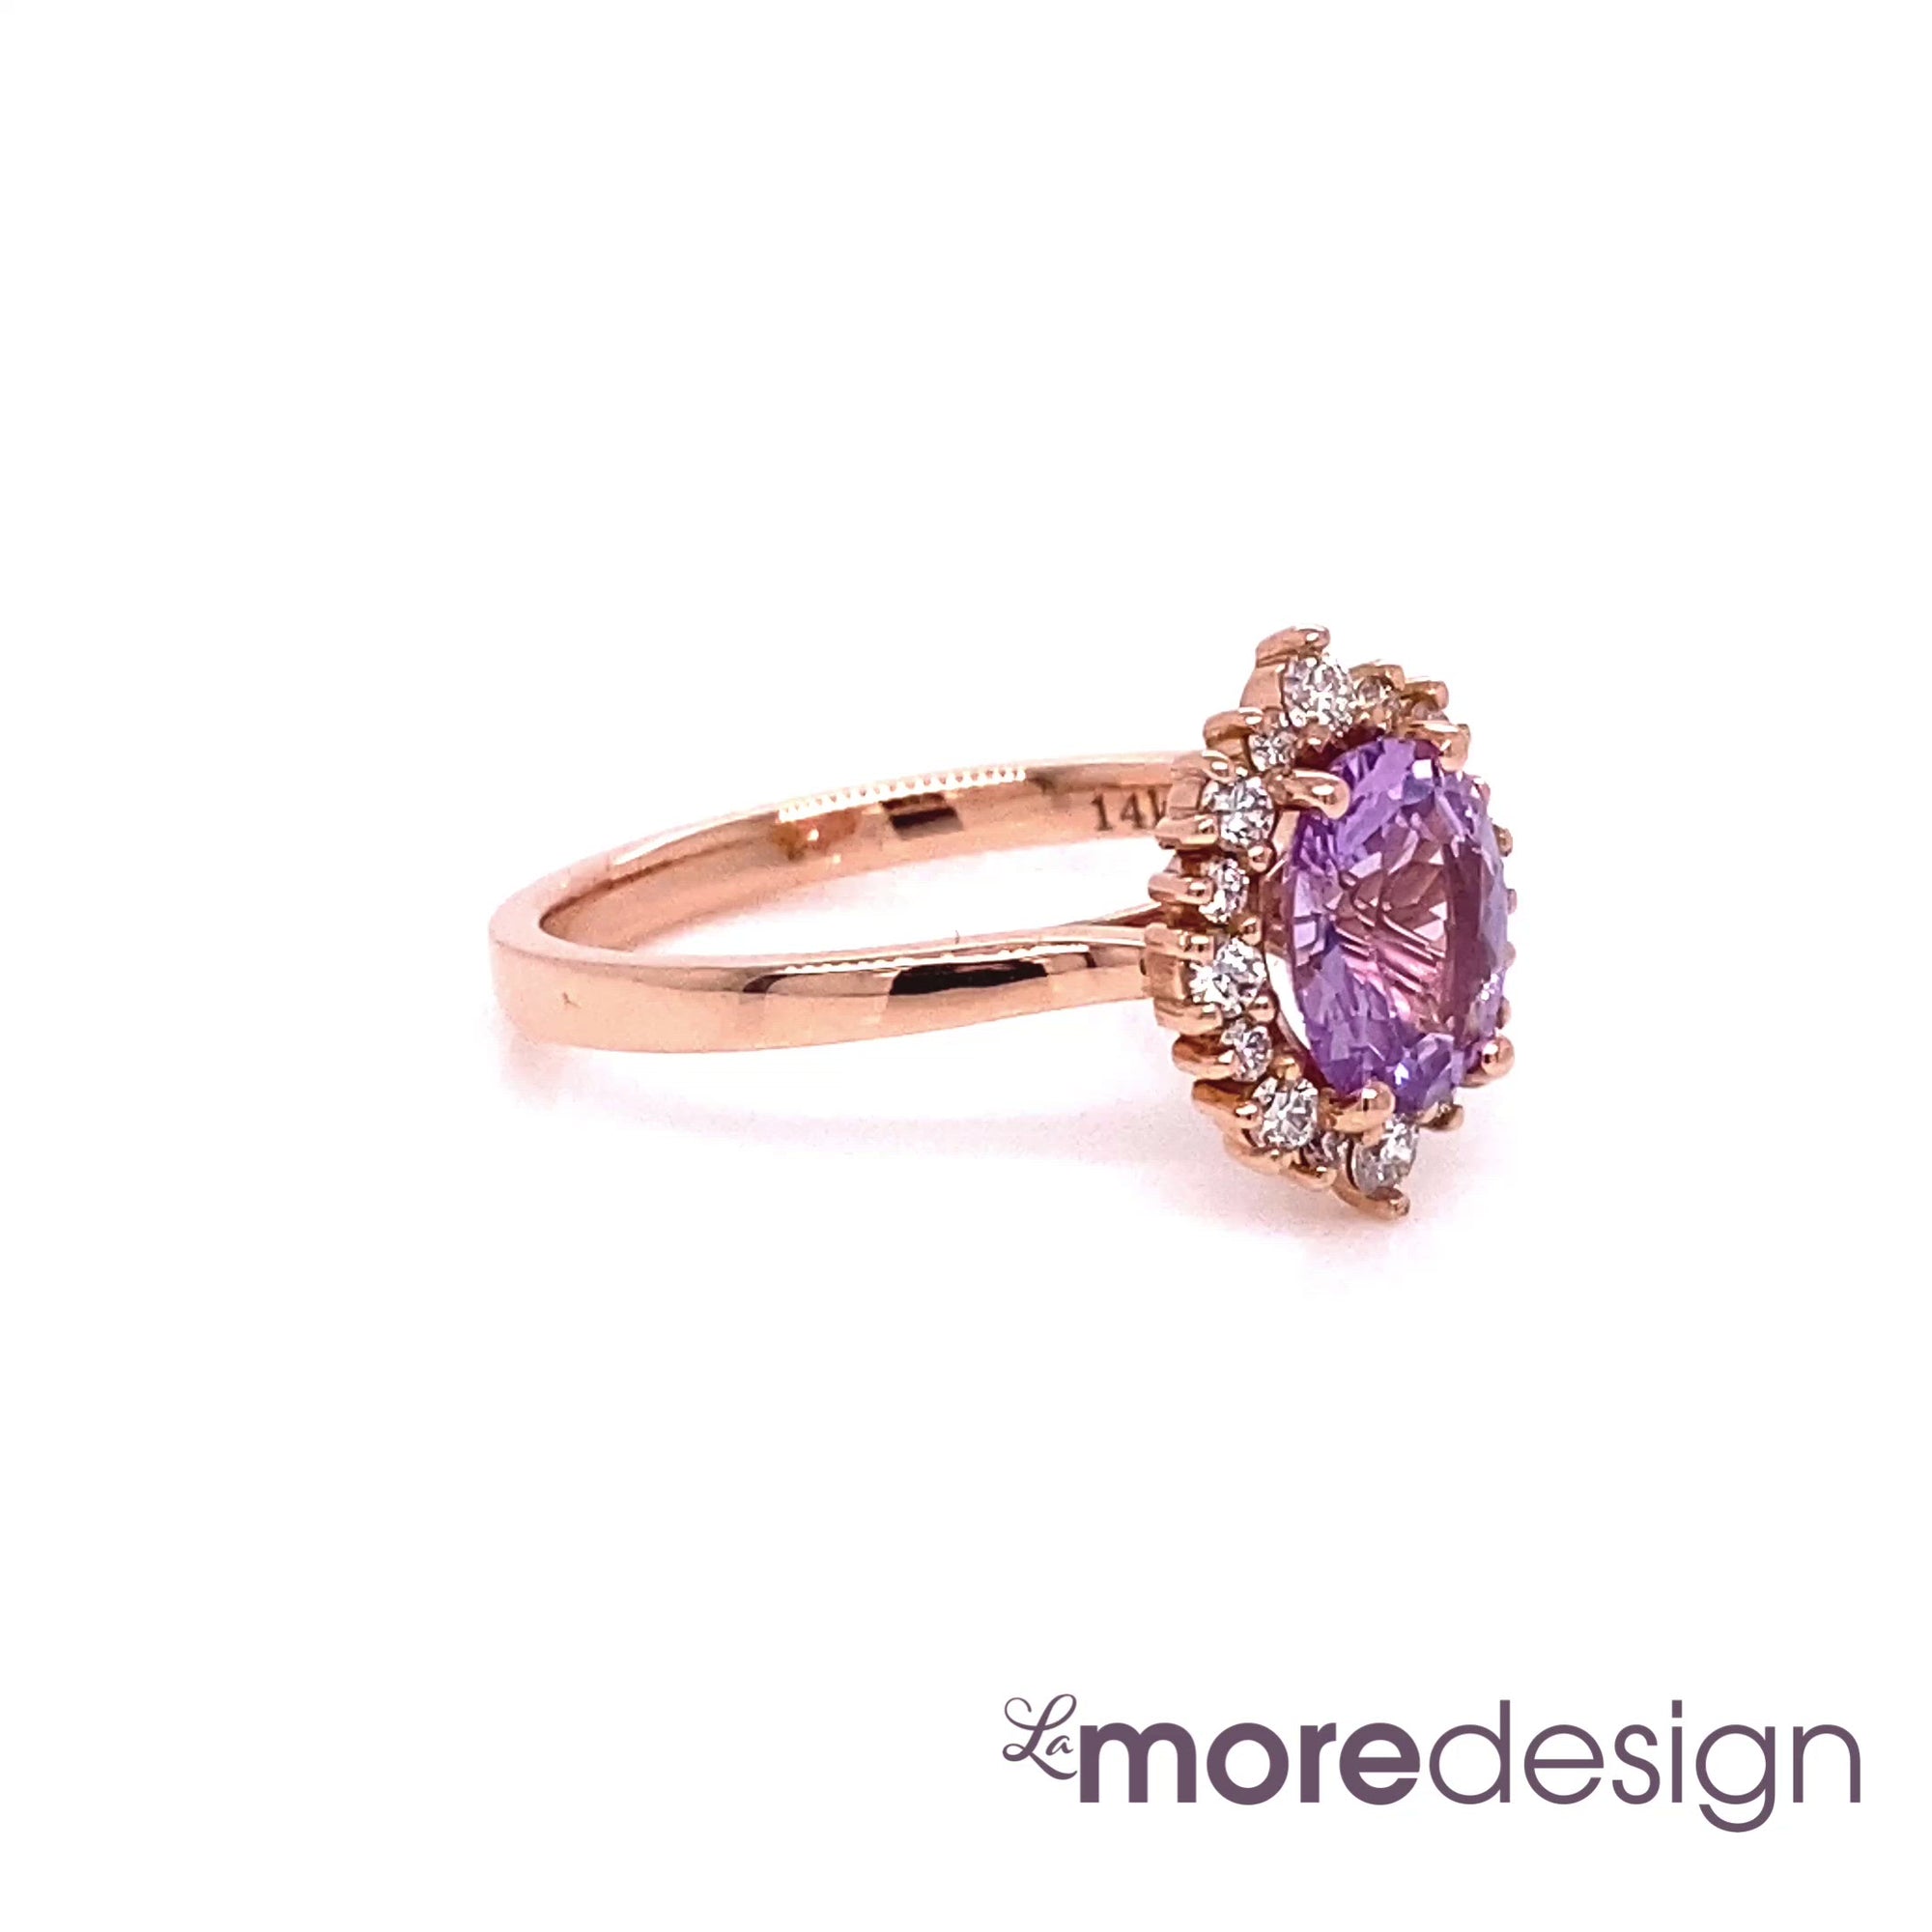 Timelessly elegant lavender sapphire engagement ring is crafted in a 14k rose gold Tiara Halo Diamond ring setting with a 1.35-carat oval cut natural sapphire center ~ the total gemstone and diamond weight of the whole ring is 1.65 ct.tw.  This one of a kind sapphire ring is perfect for brides looking for non-traditional engagement rings. All our wedding bands can pair beautifully with this gorgeous halo diamond sapphire ring!